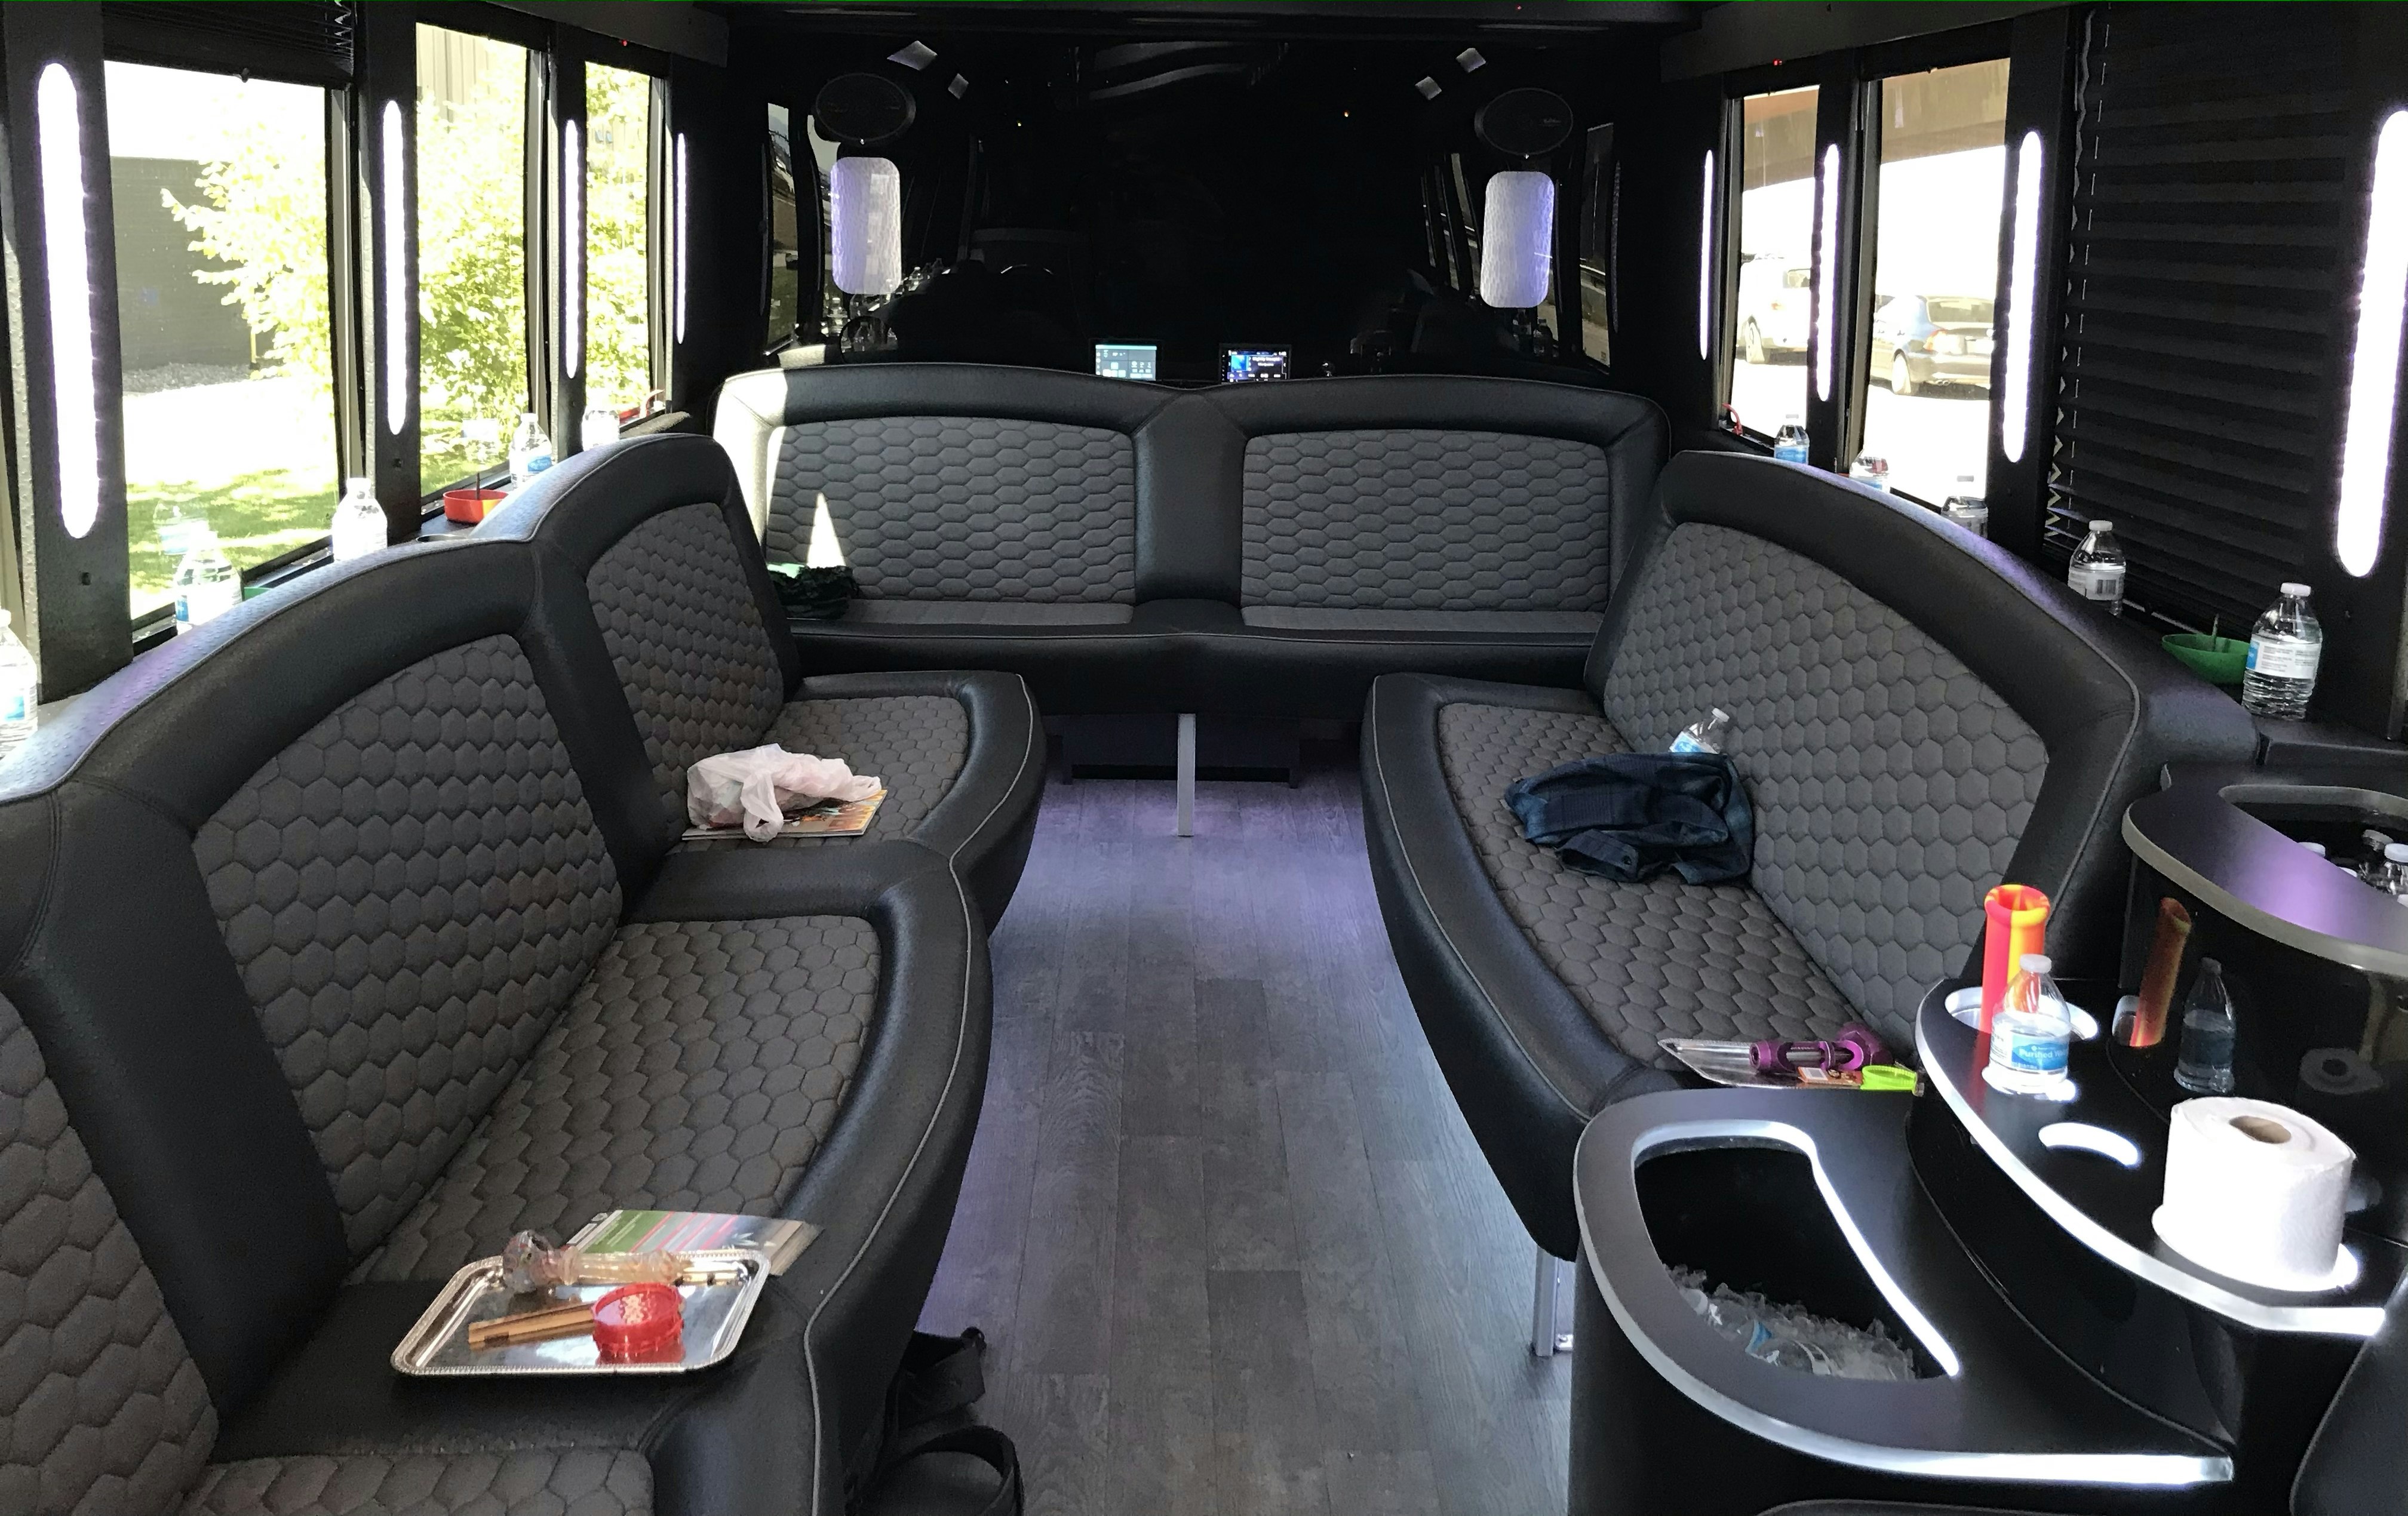 The black and grey interior of the My 420 Tour bus, where the upholstered seats have small metal trays laid out with cannabis paraphernalia and bottles of water and tucked on various surfaces. 